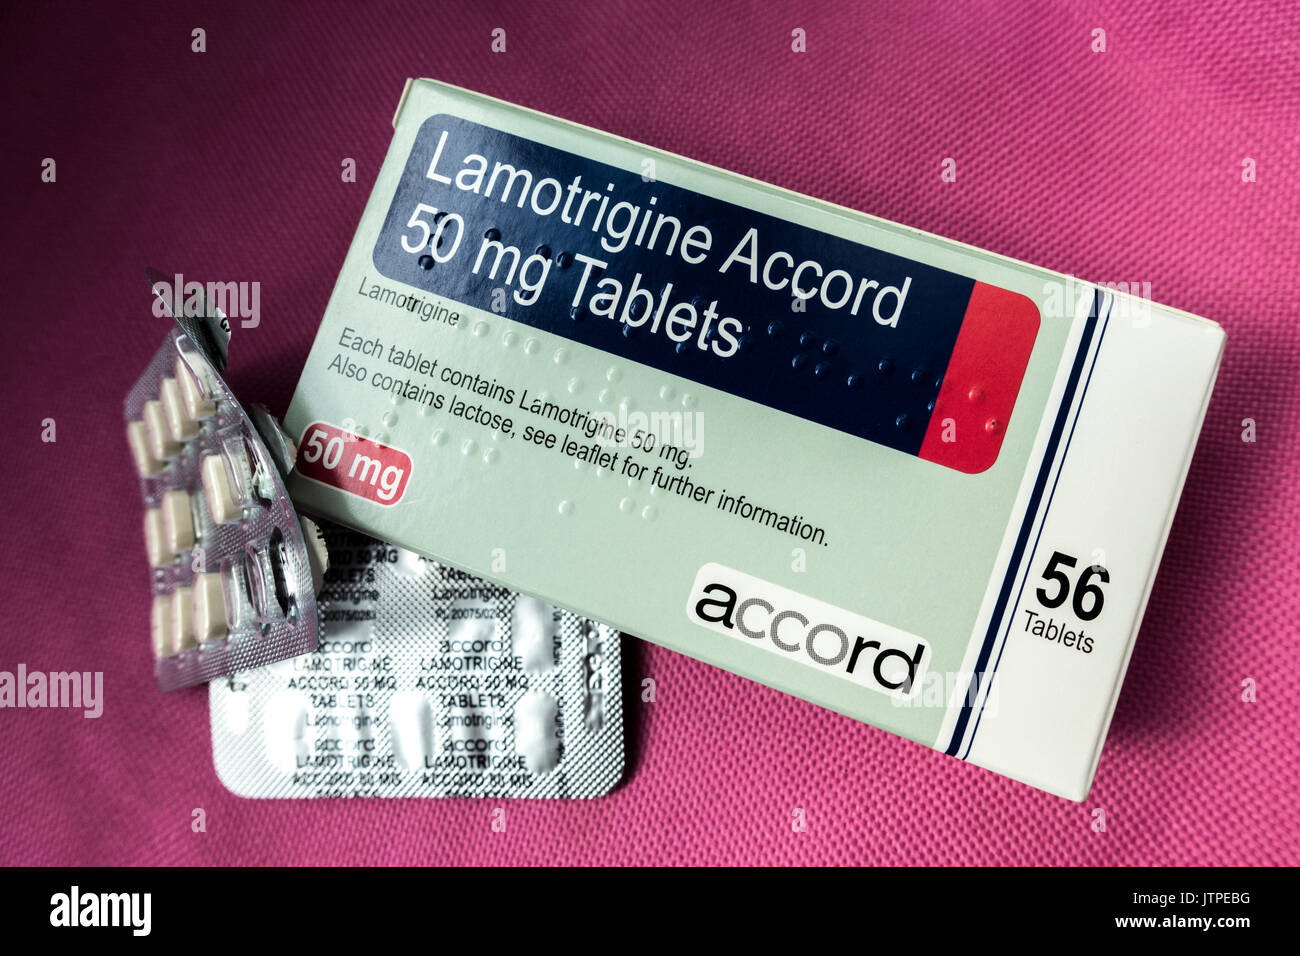 A 56 tablets pack of Lamotrigine Accord, an anticonvulsant drug for treatment of epilepsy and bipolar disorders. Stock Photo